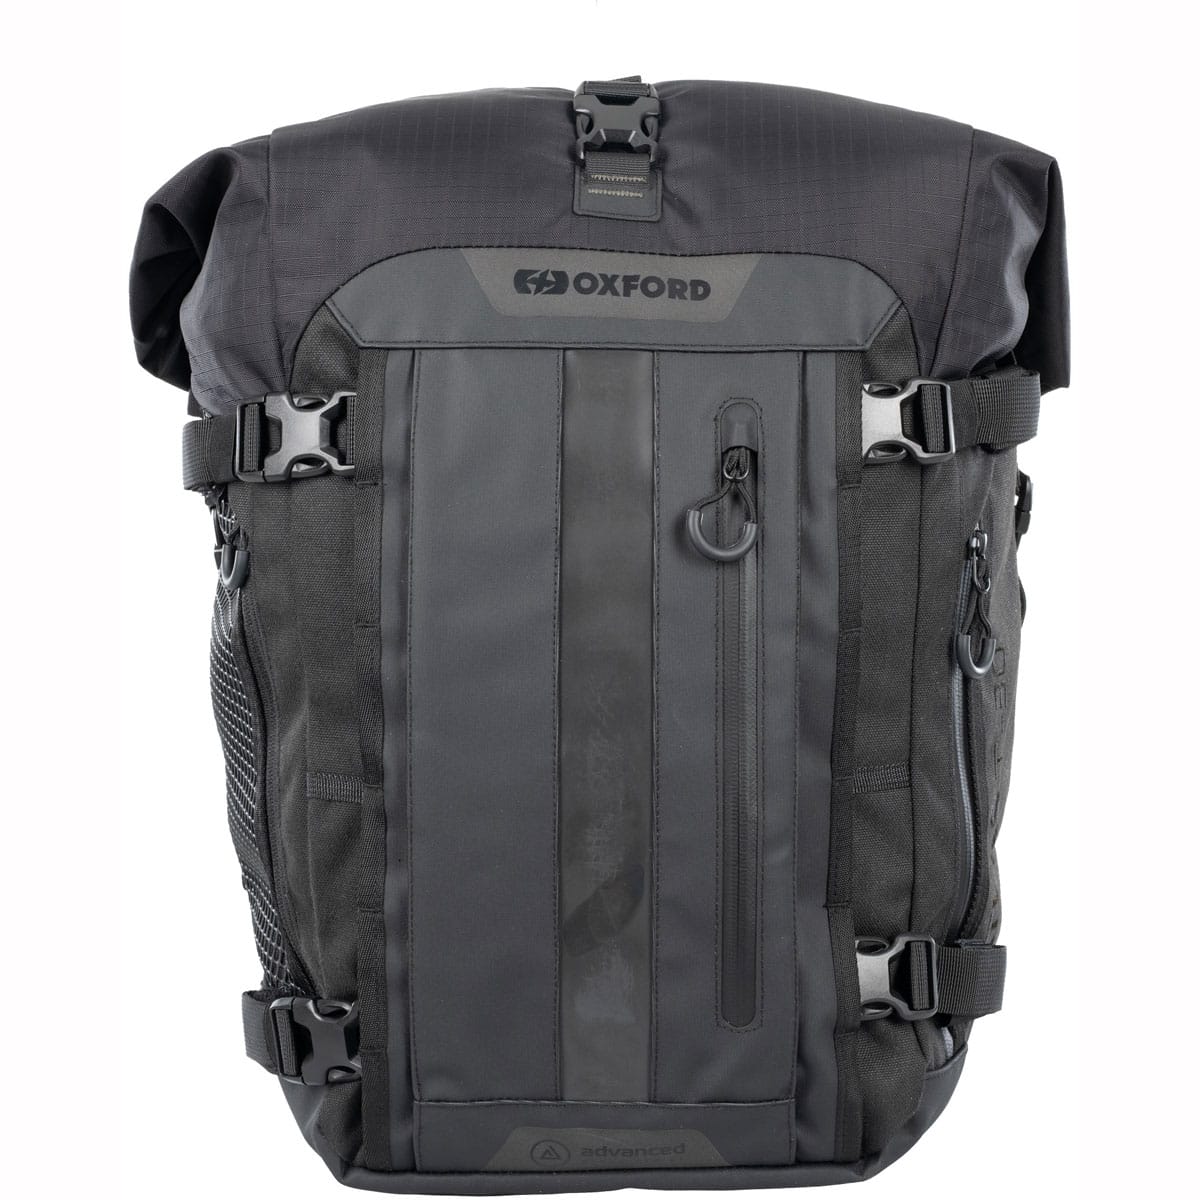 Oxford Atlas T-30 Advanced Tourpack Tailpack BlackOxford Atlas T-30 Advanced Tourpack Tailpack Black